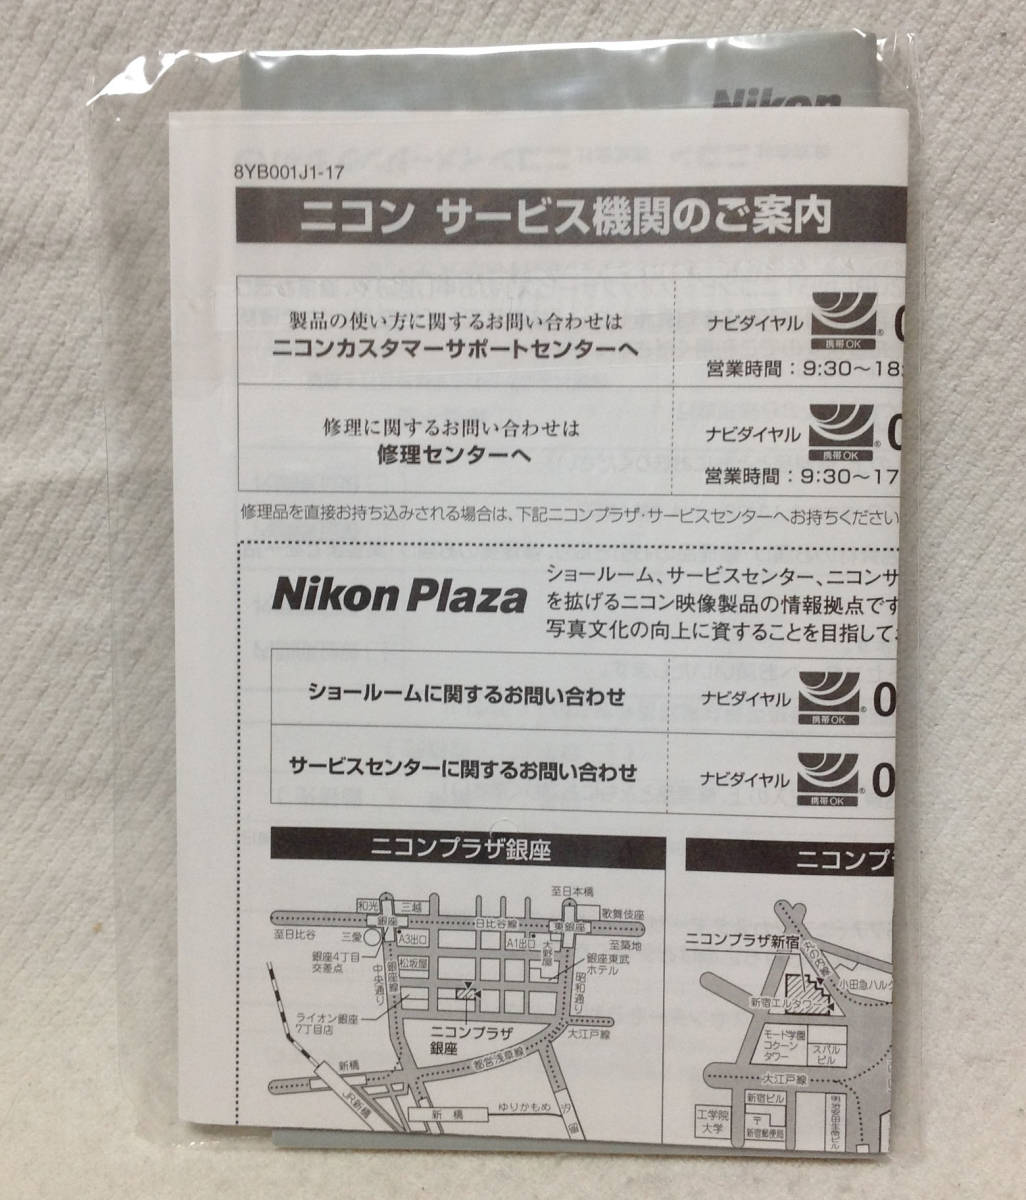 Nikon Nikon S3 YEAR 2000 LIMITED EDITION BLAK reprint manual treatment instructions unopened goods ( black body for owner manual )